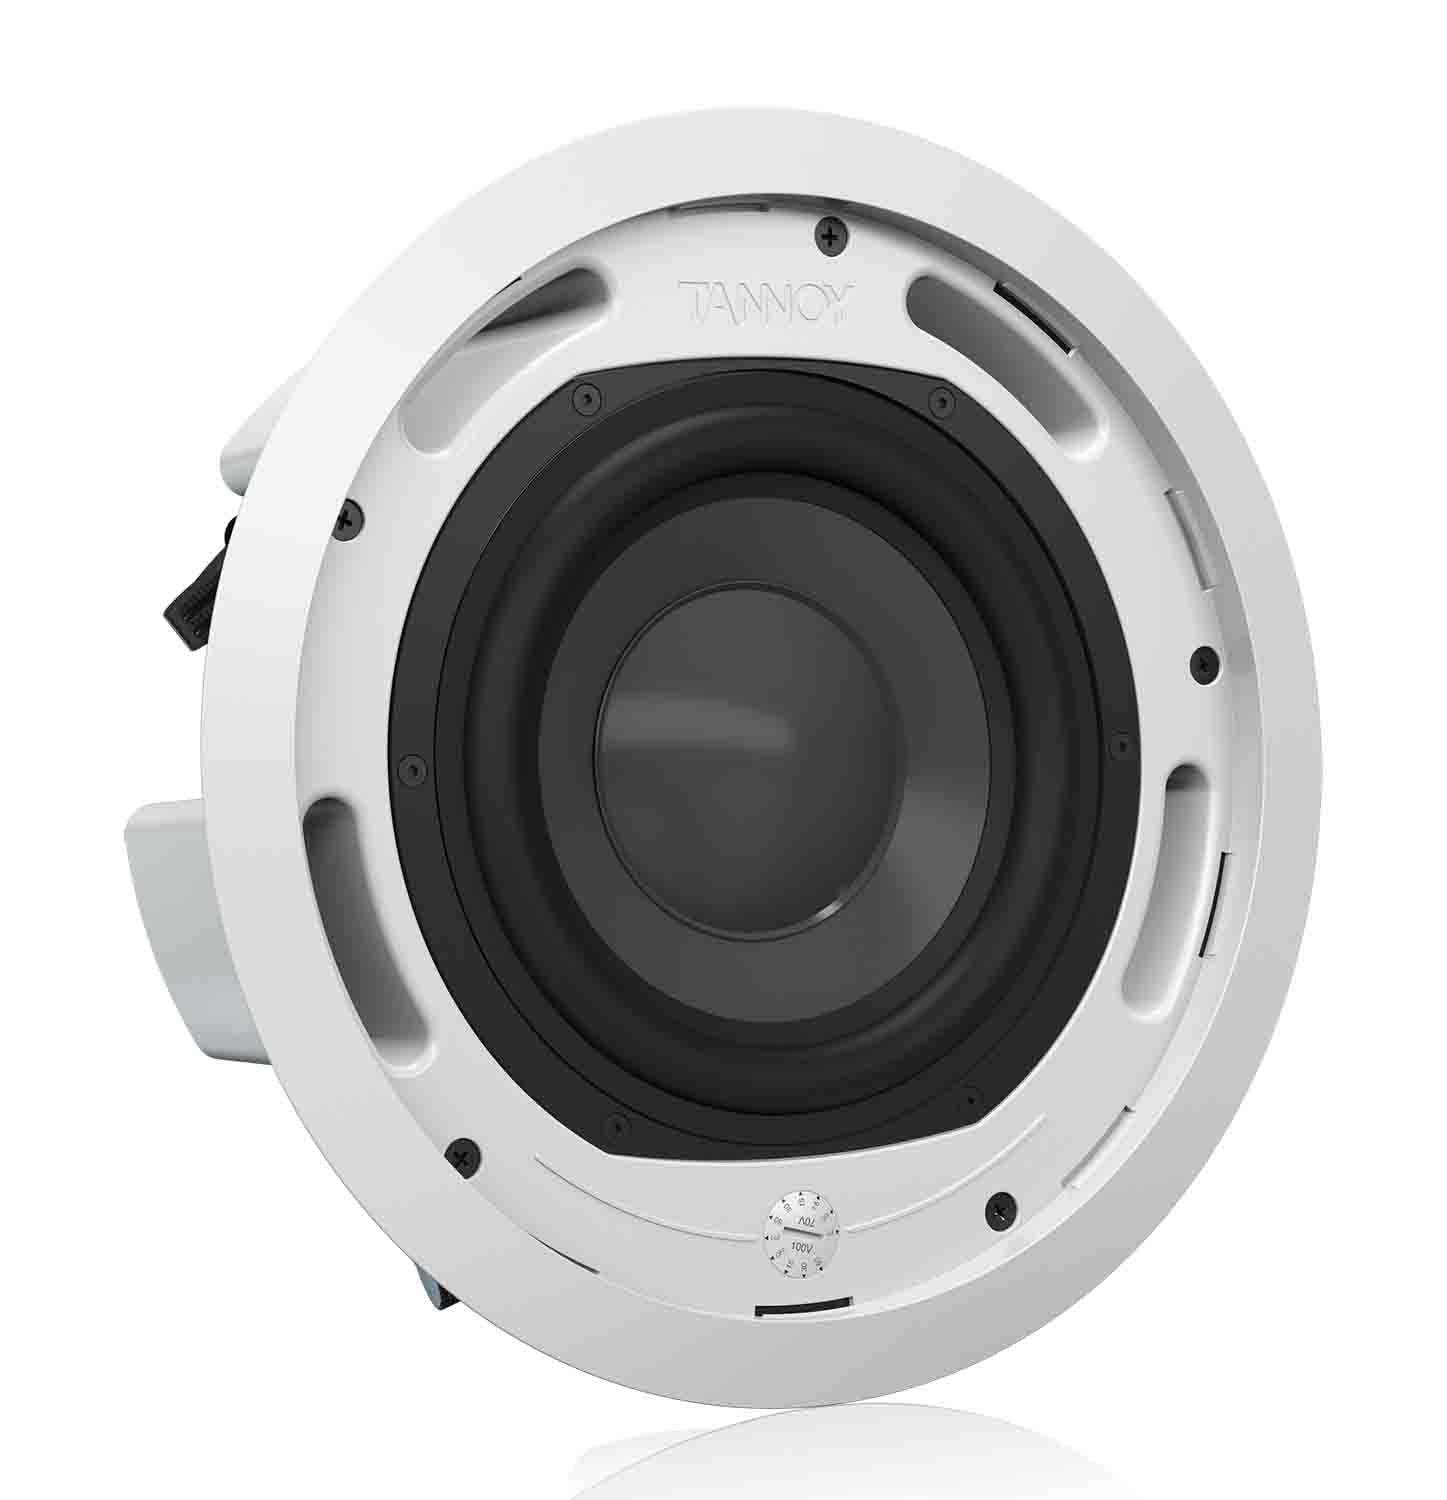 Tannoy CMS 801 SUB PI, 8-Inch Compact Ceiling-Mounted Subwoofer for Installation Applications - Pre-Install - Hollywood DJ